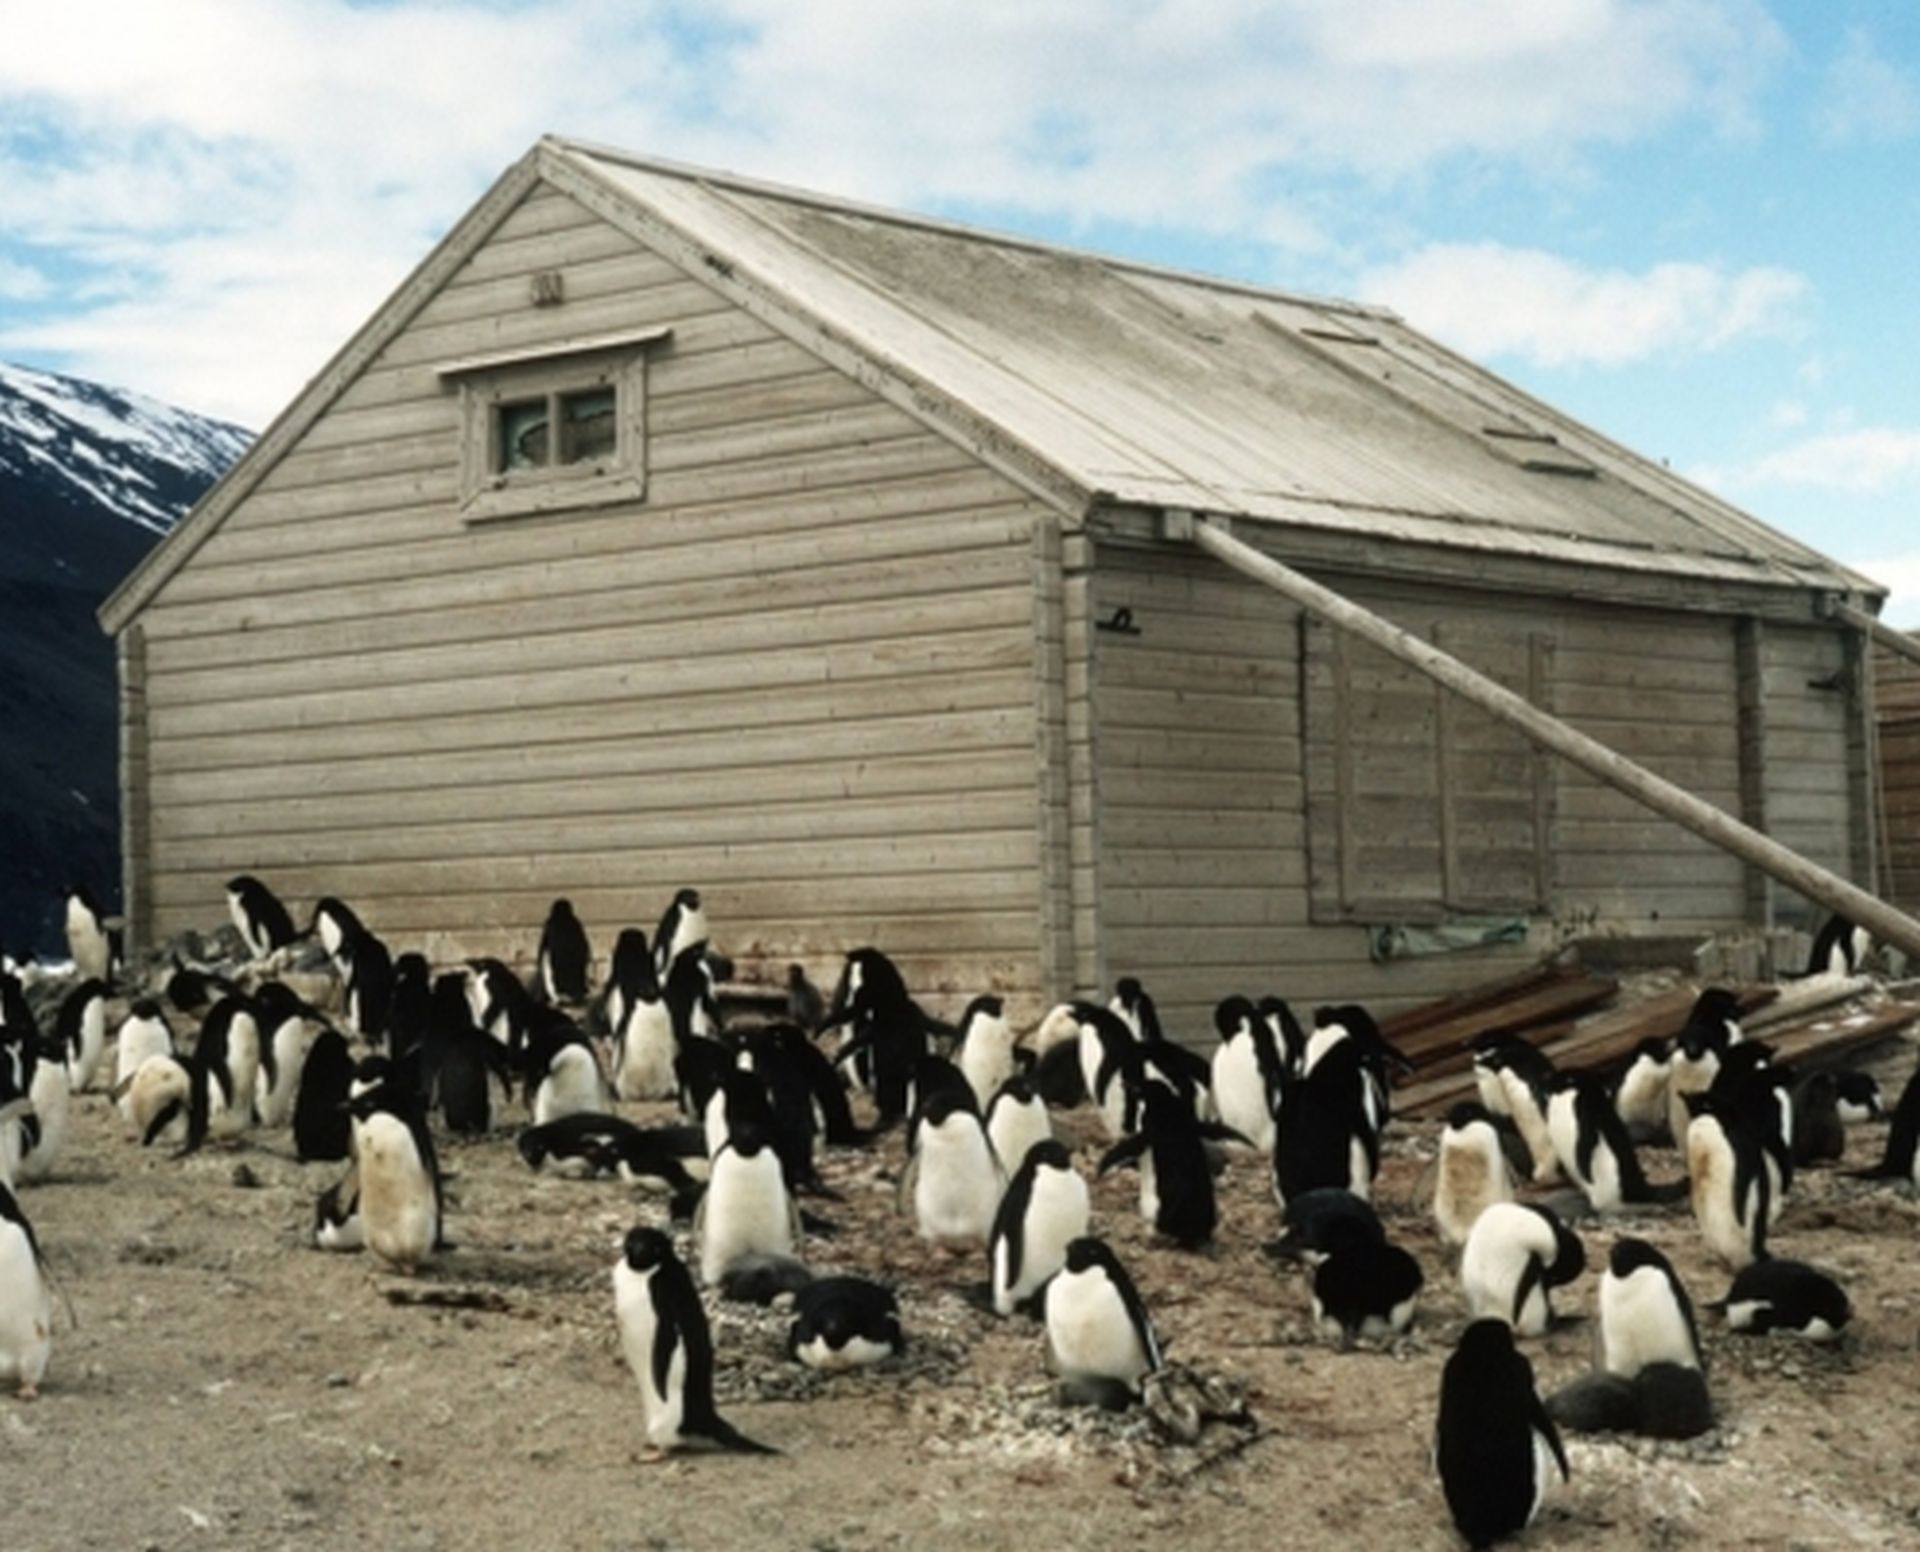 Borchgrevink’s hut at Cape Adare is built amongst a colony of over 400,000 breeding pairs of Adelie penguins.